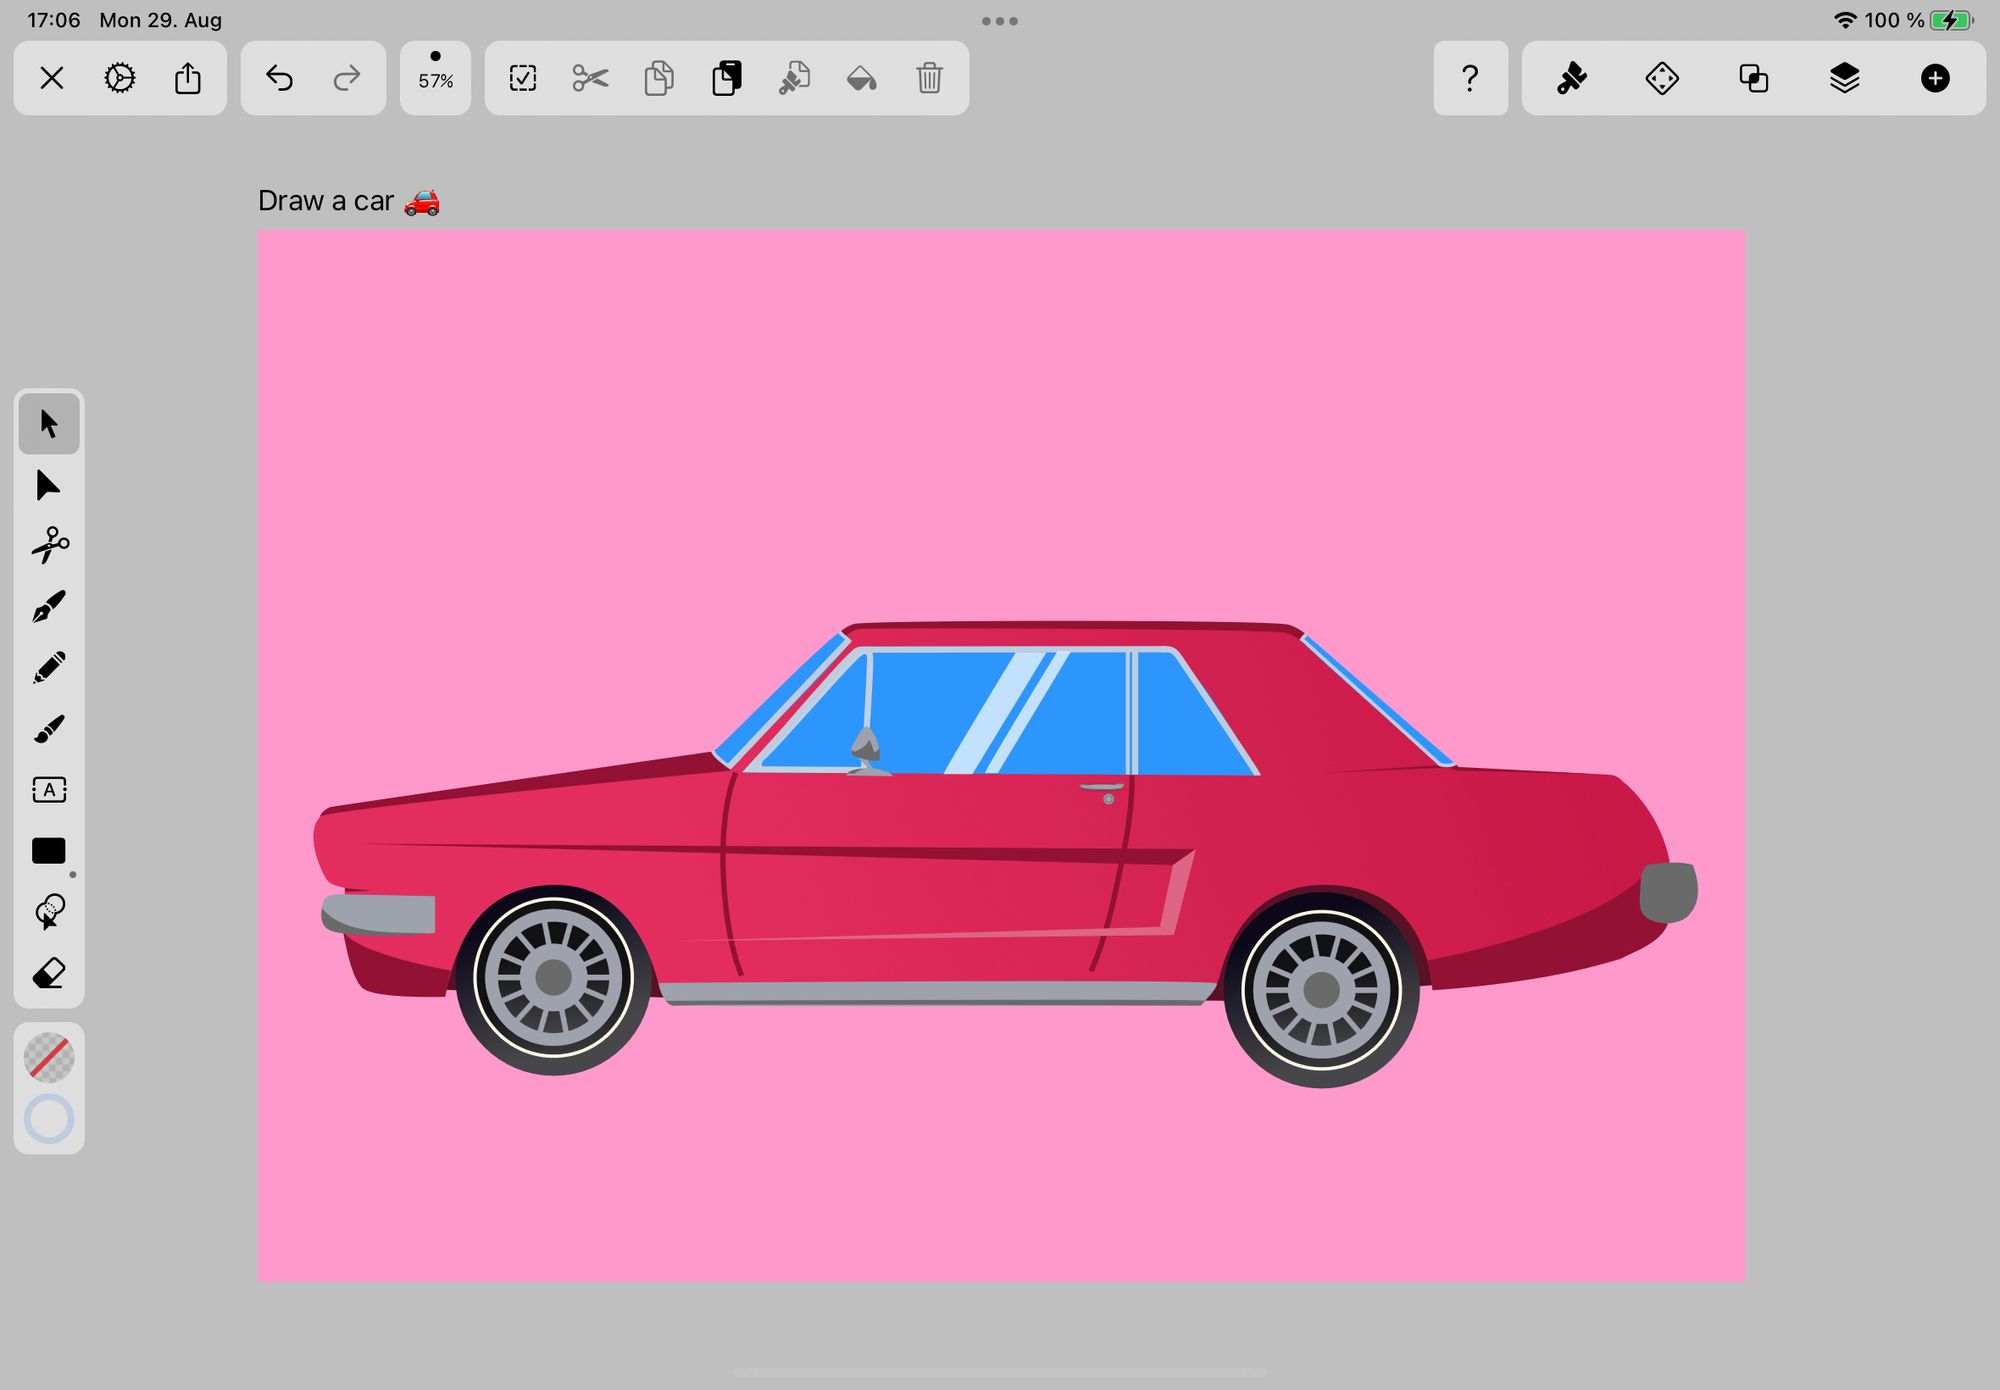 How to draw a car tutorial | Vectornator